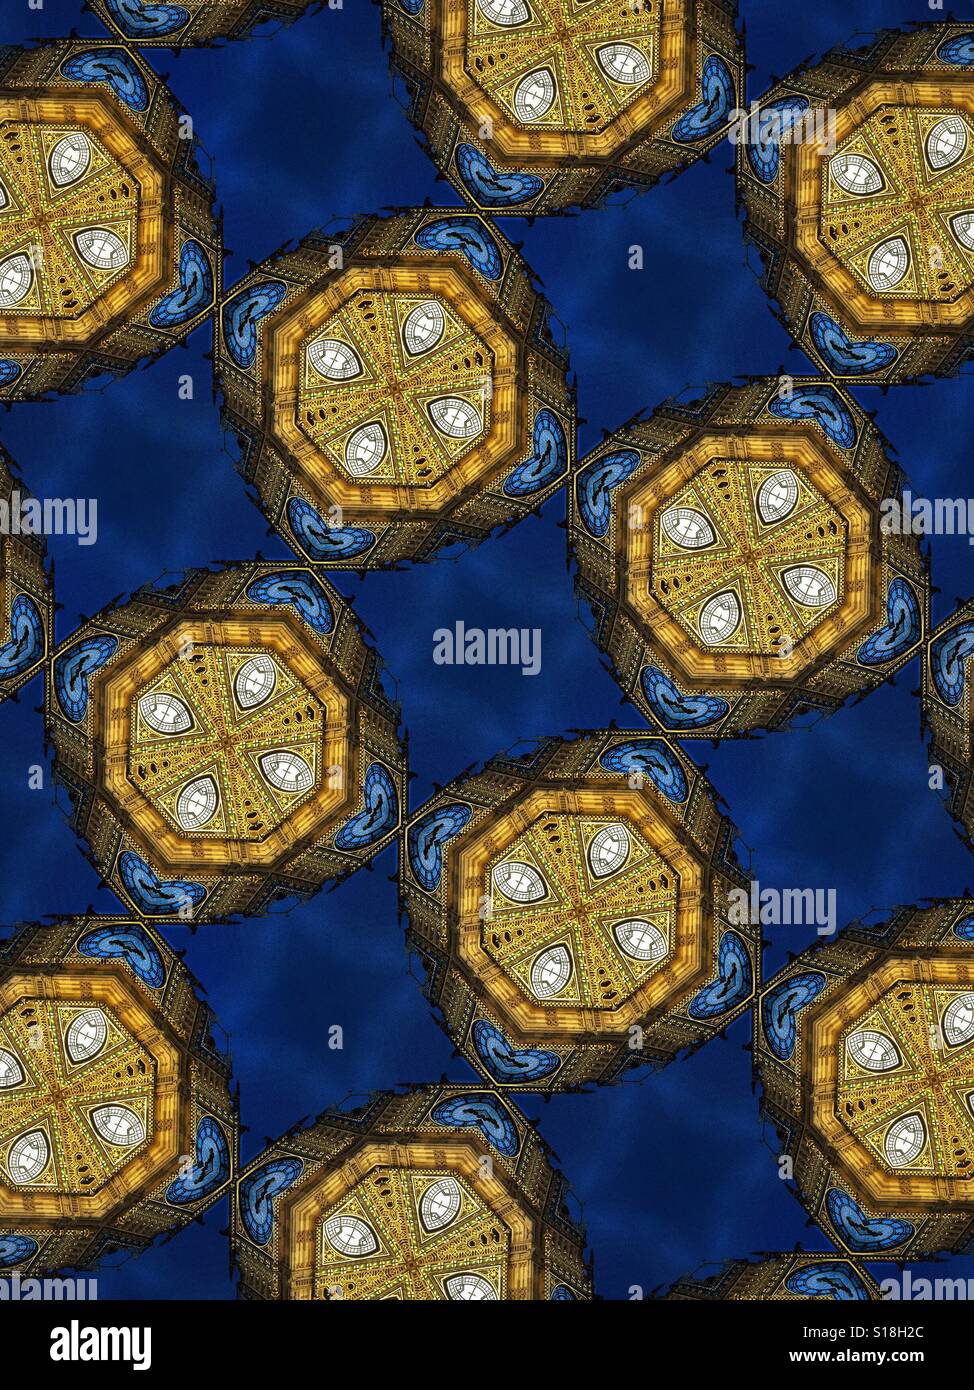 A kaleidoscopic image featuring blue and gold tones Stock Photo